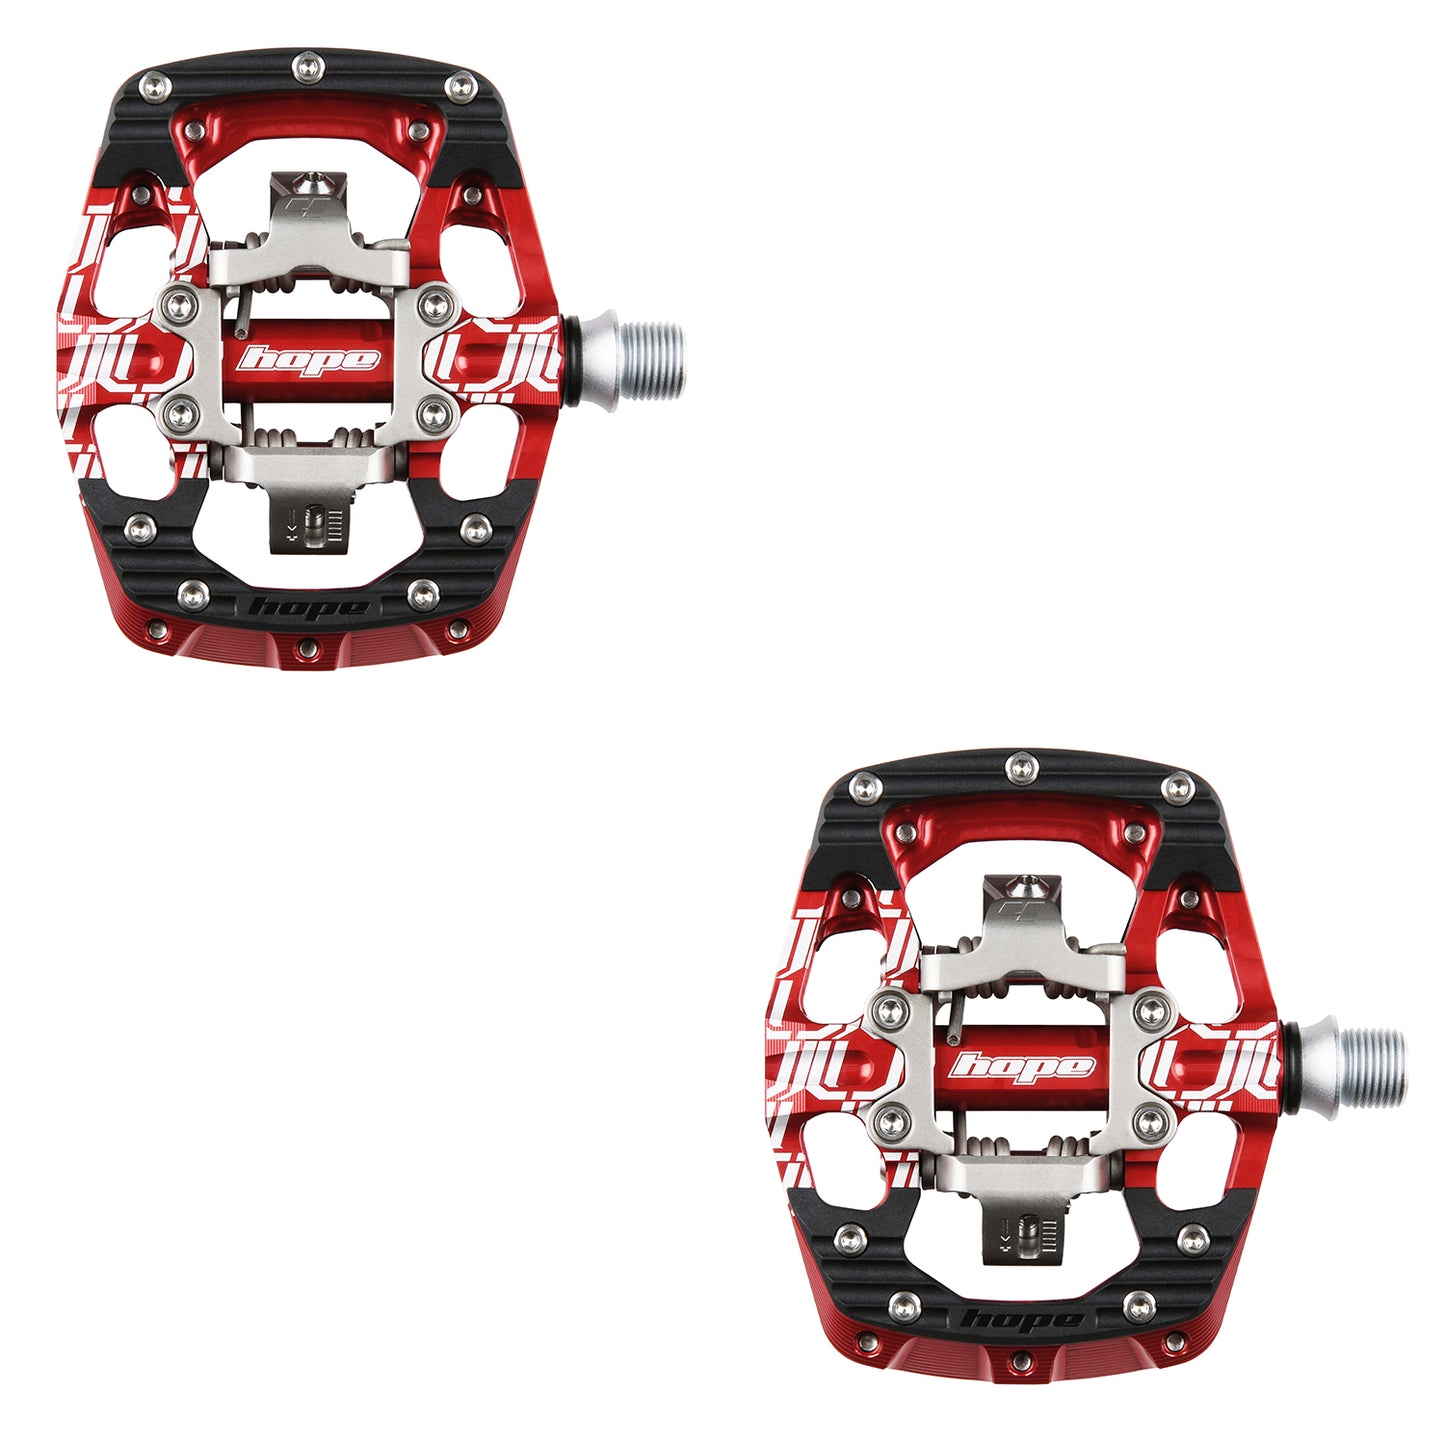 Hope Union Gravity Pedals - Pair - Red